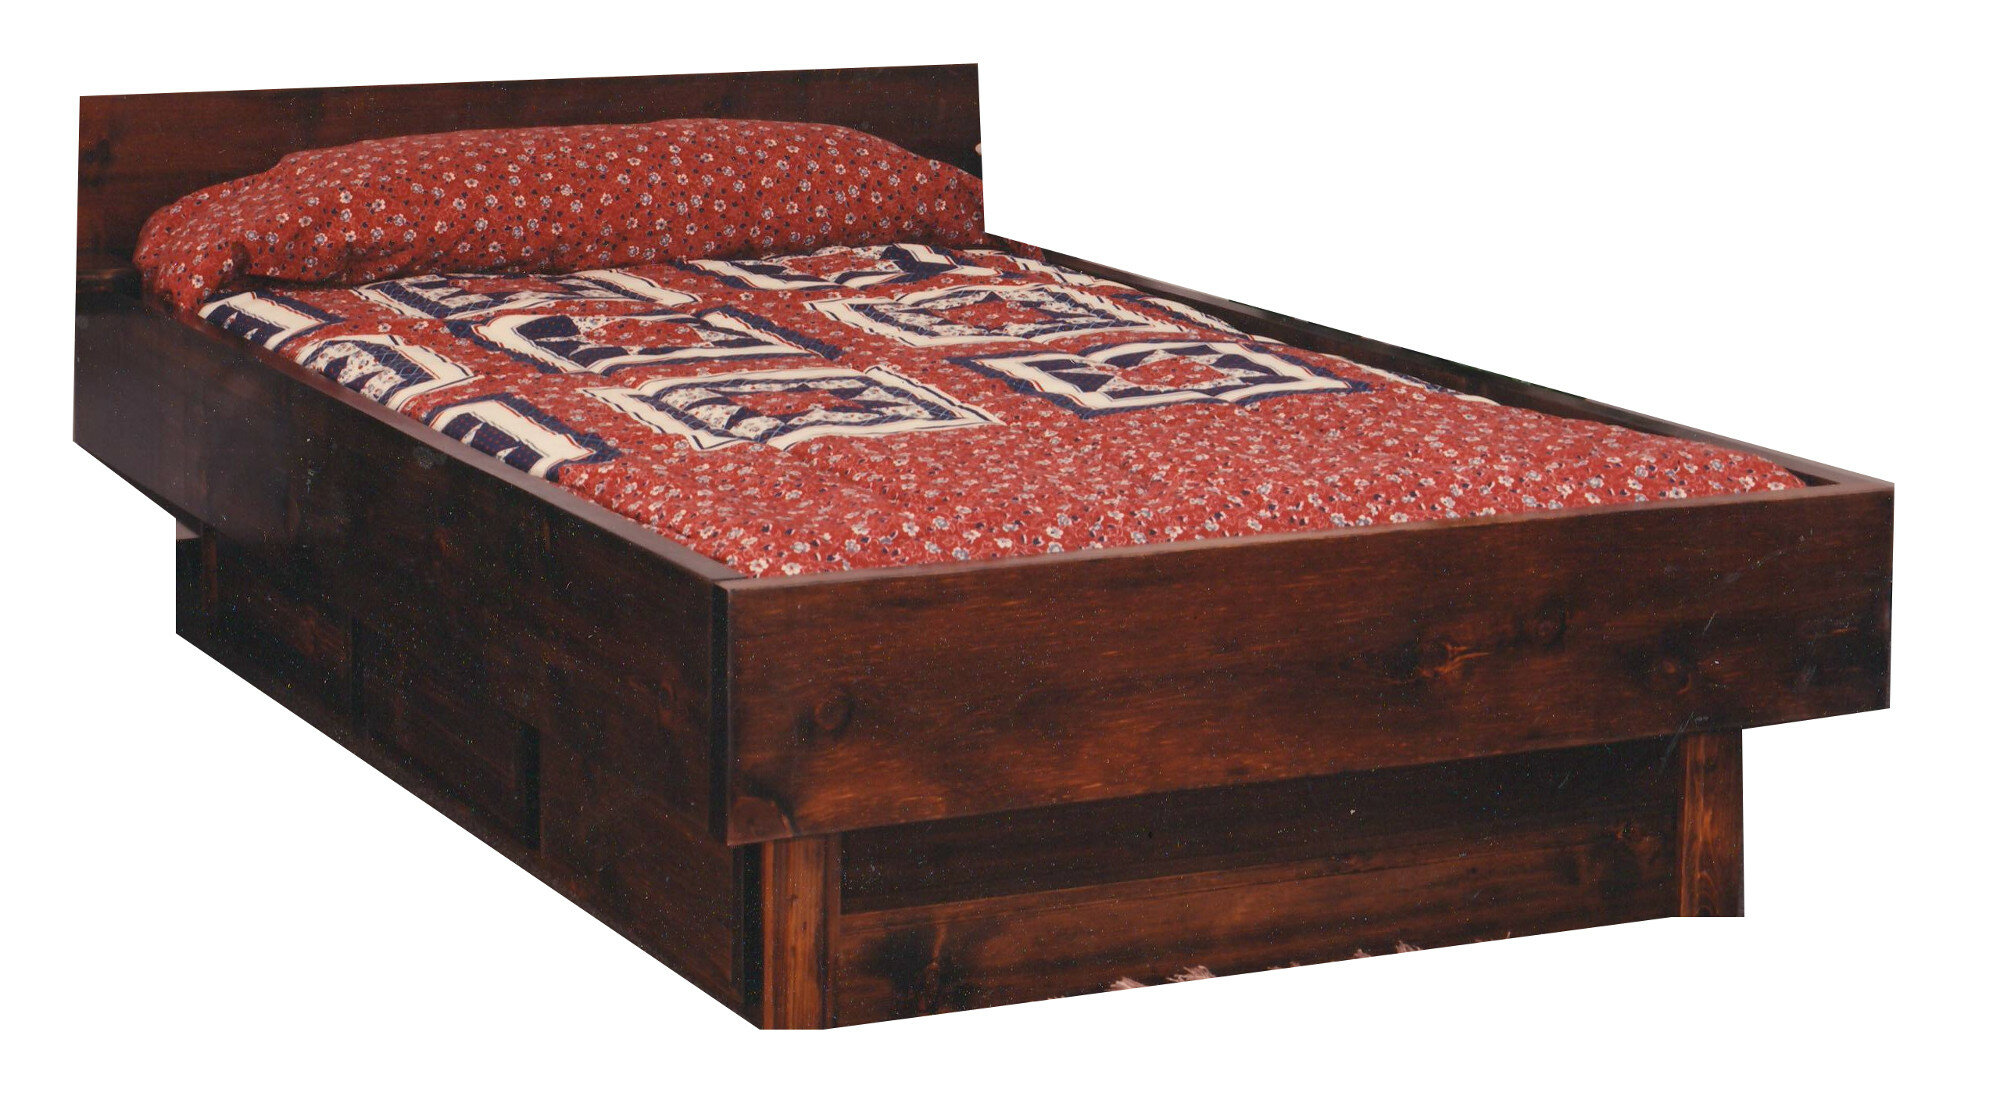 waterbed mattress for sale in canada